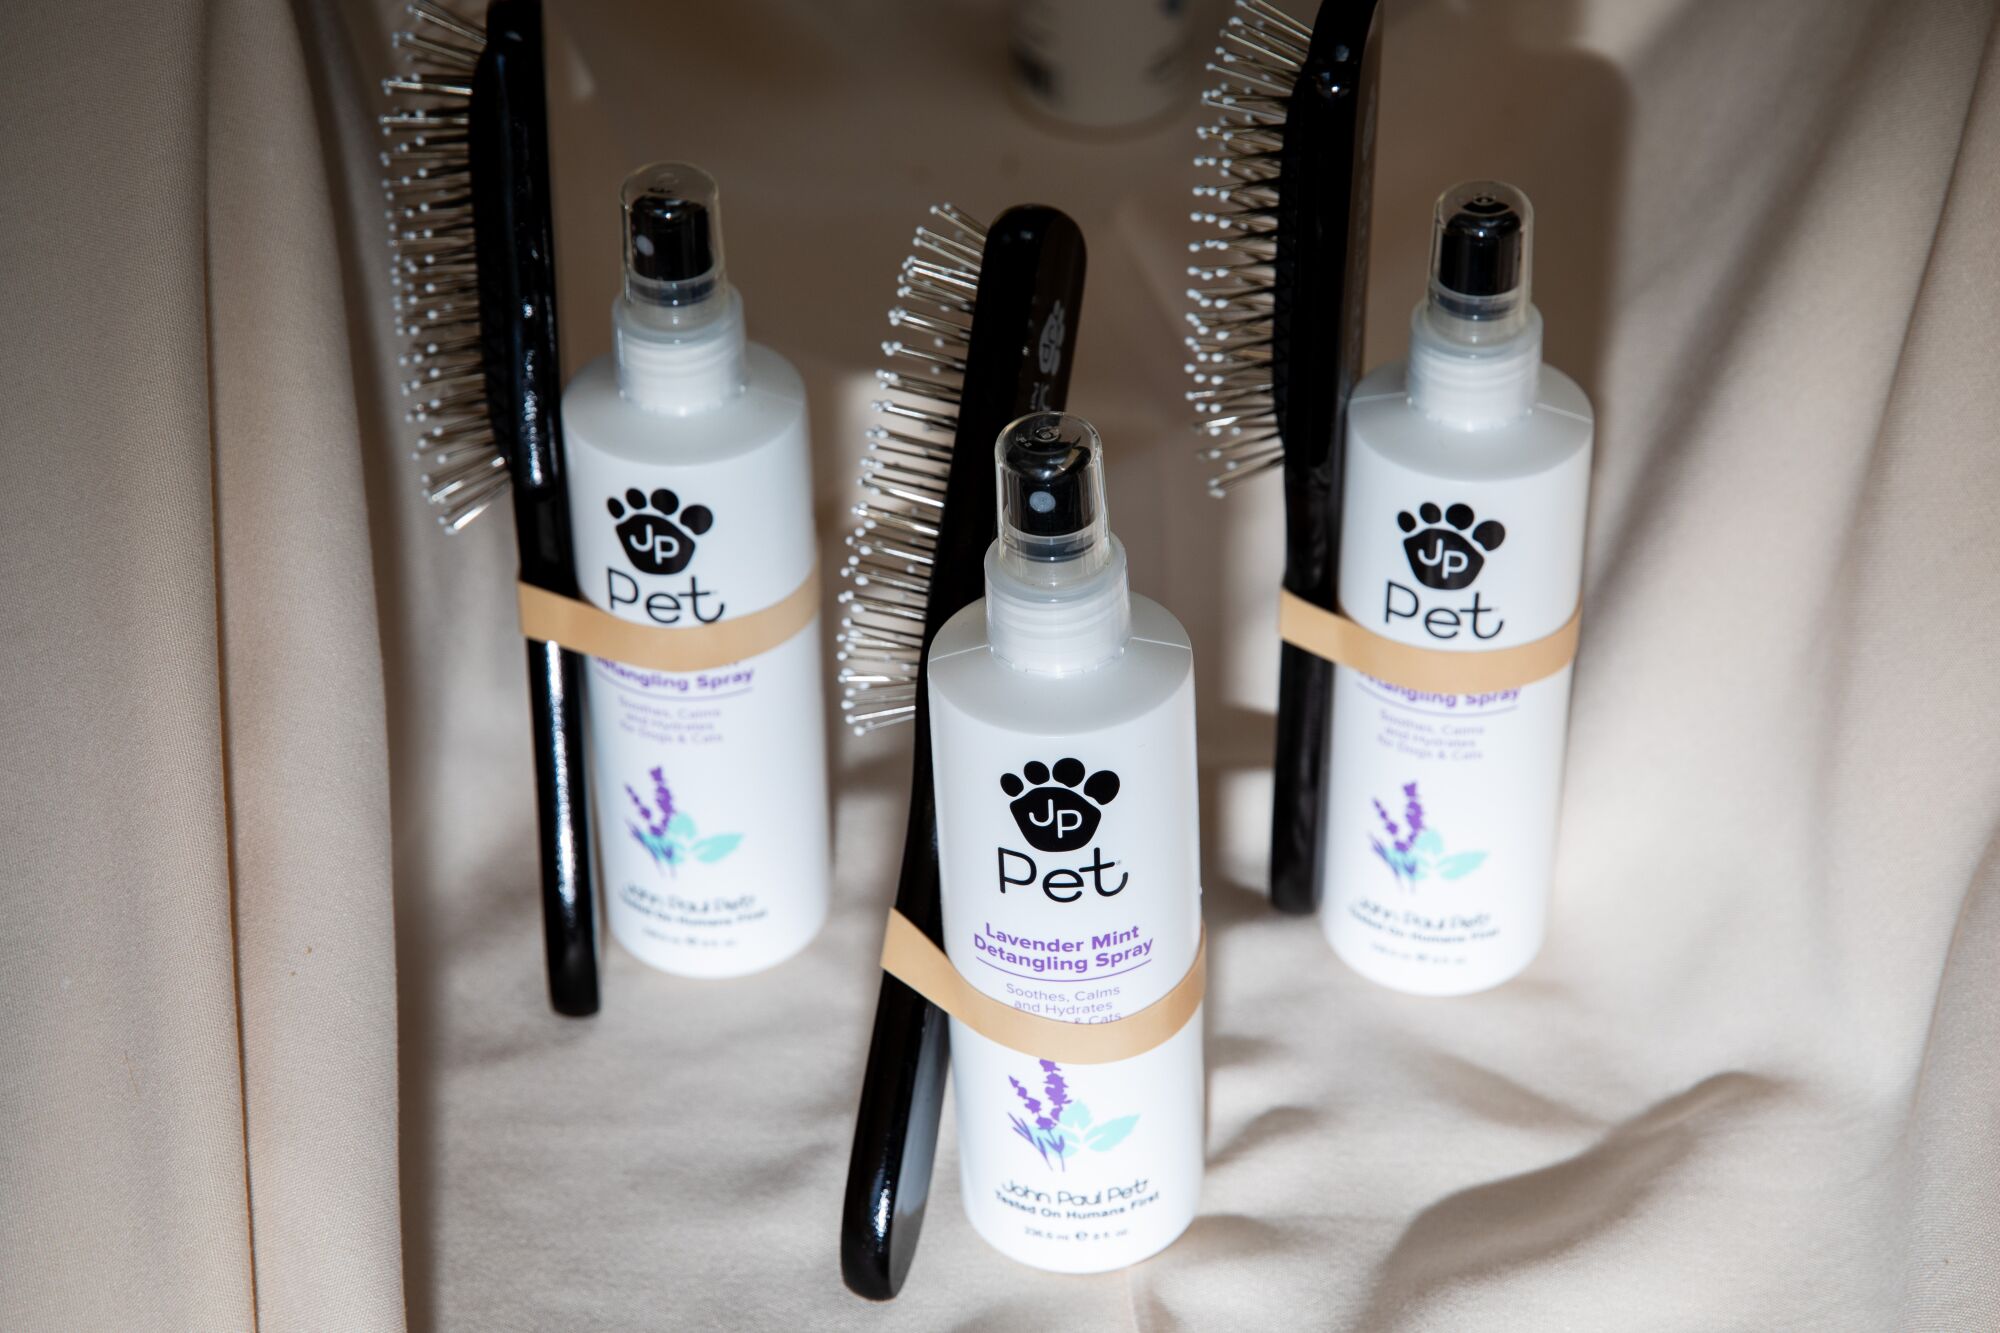 A brush and lavender mint detangling spray by John Paul Pets, which was one of the sponsors on hand.